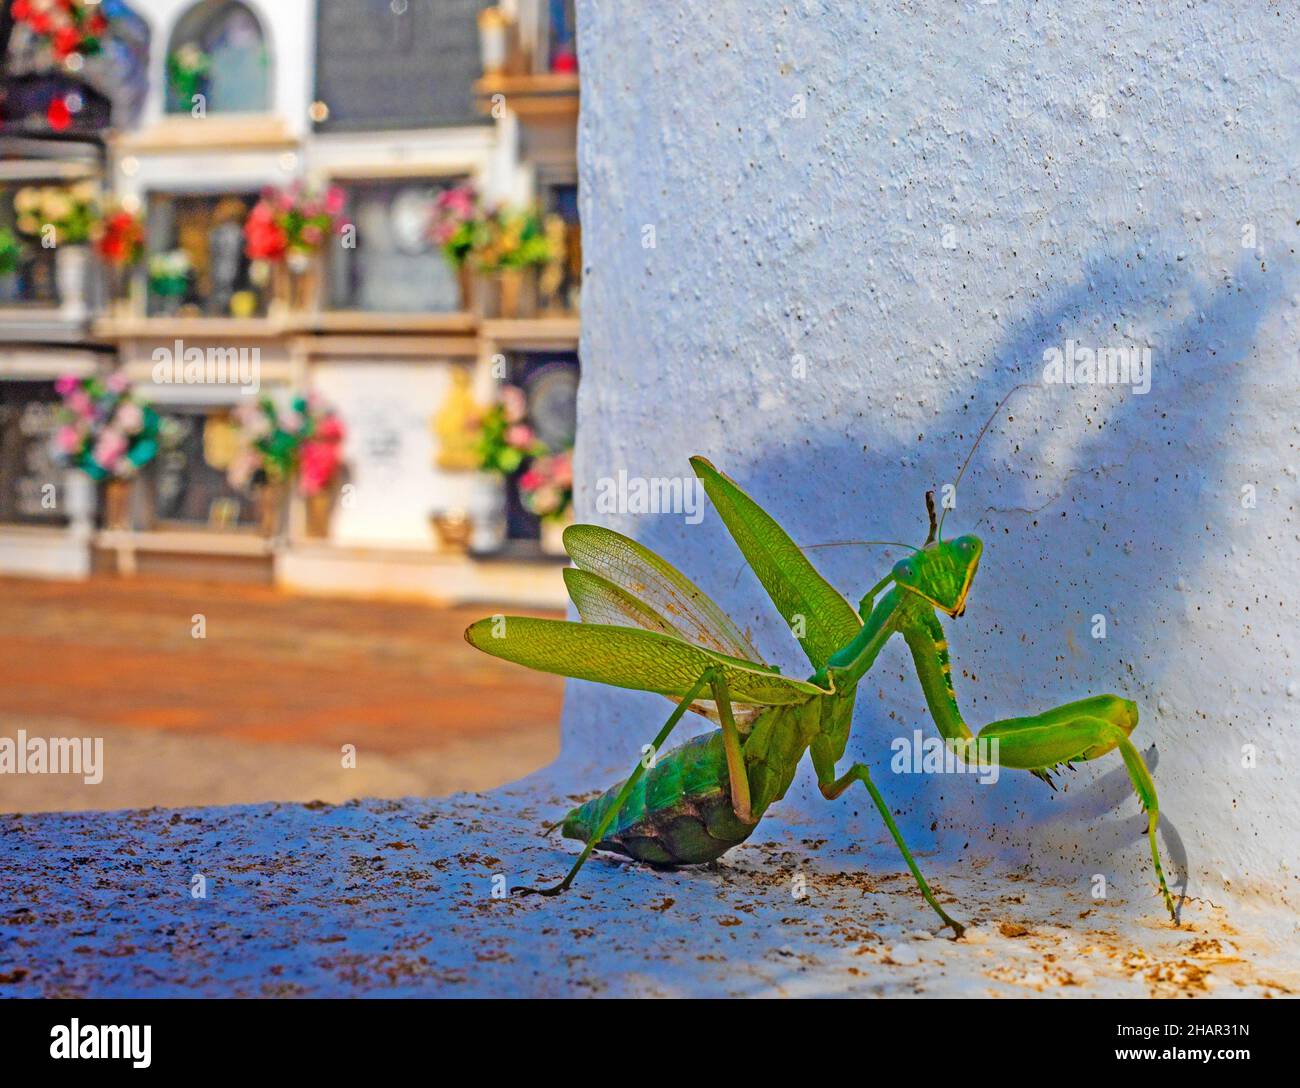 A Praying Mantis in the burial ground of Comares, a town 703 meters above sea level located in the foothills of the Montes de Málaga, Andalucia, Spain Stock Photo